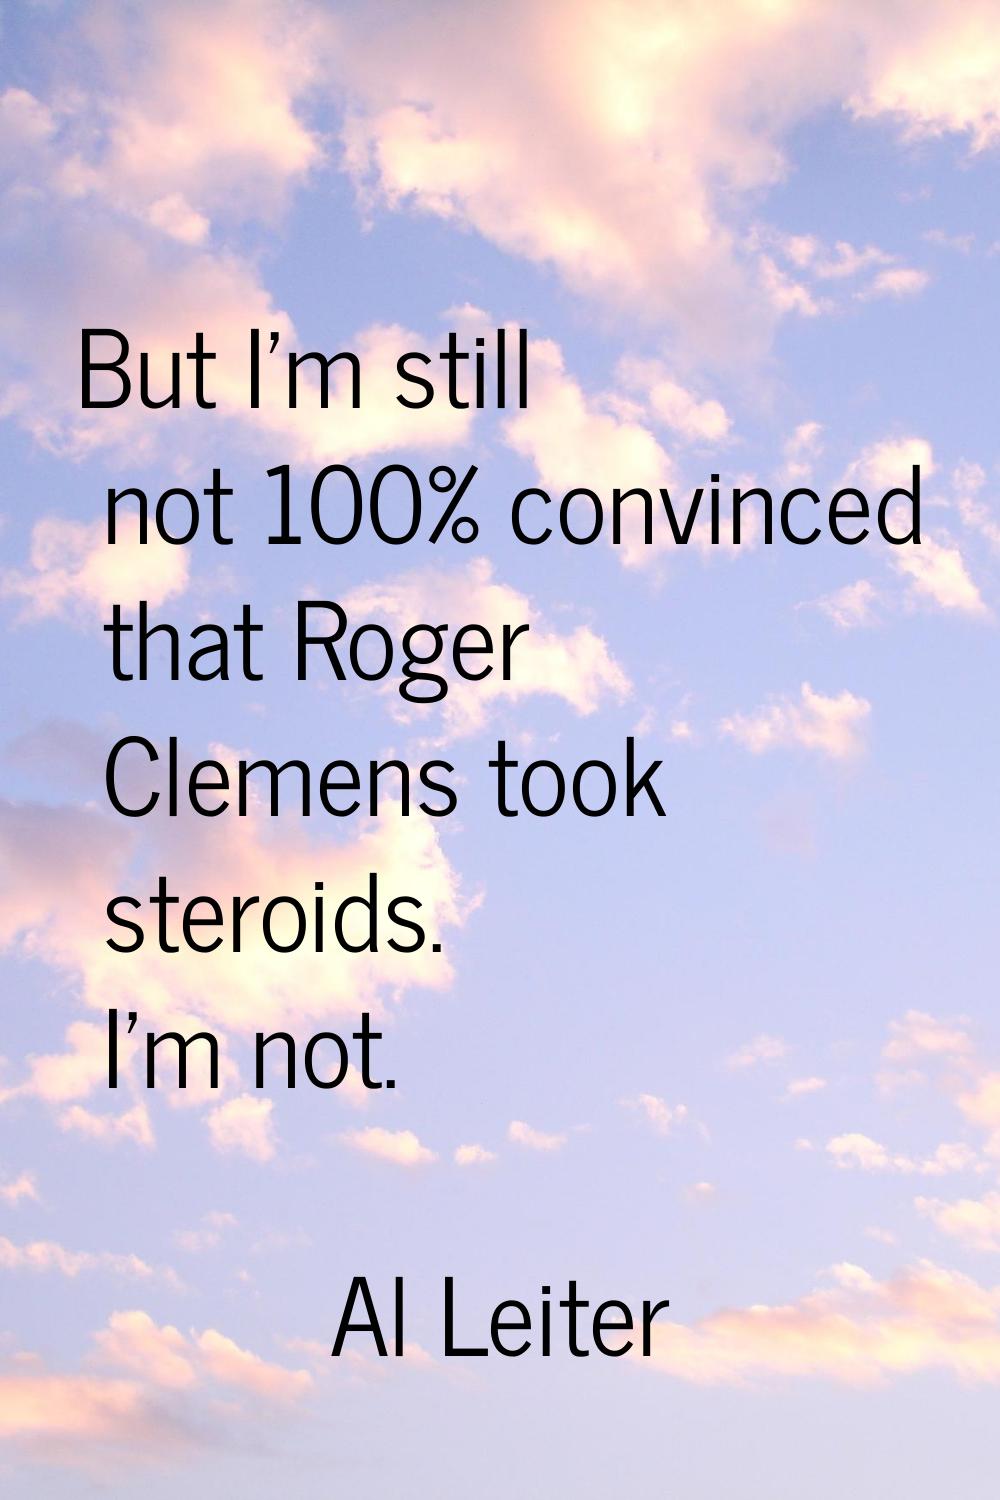 But I'm still not 100% convinced that Roger Clemens took steroids. I'm not.